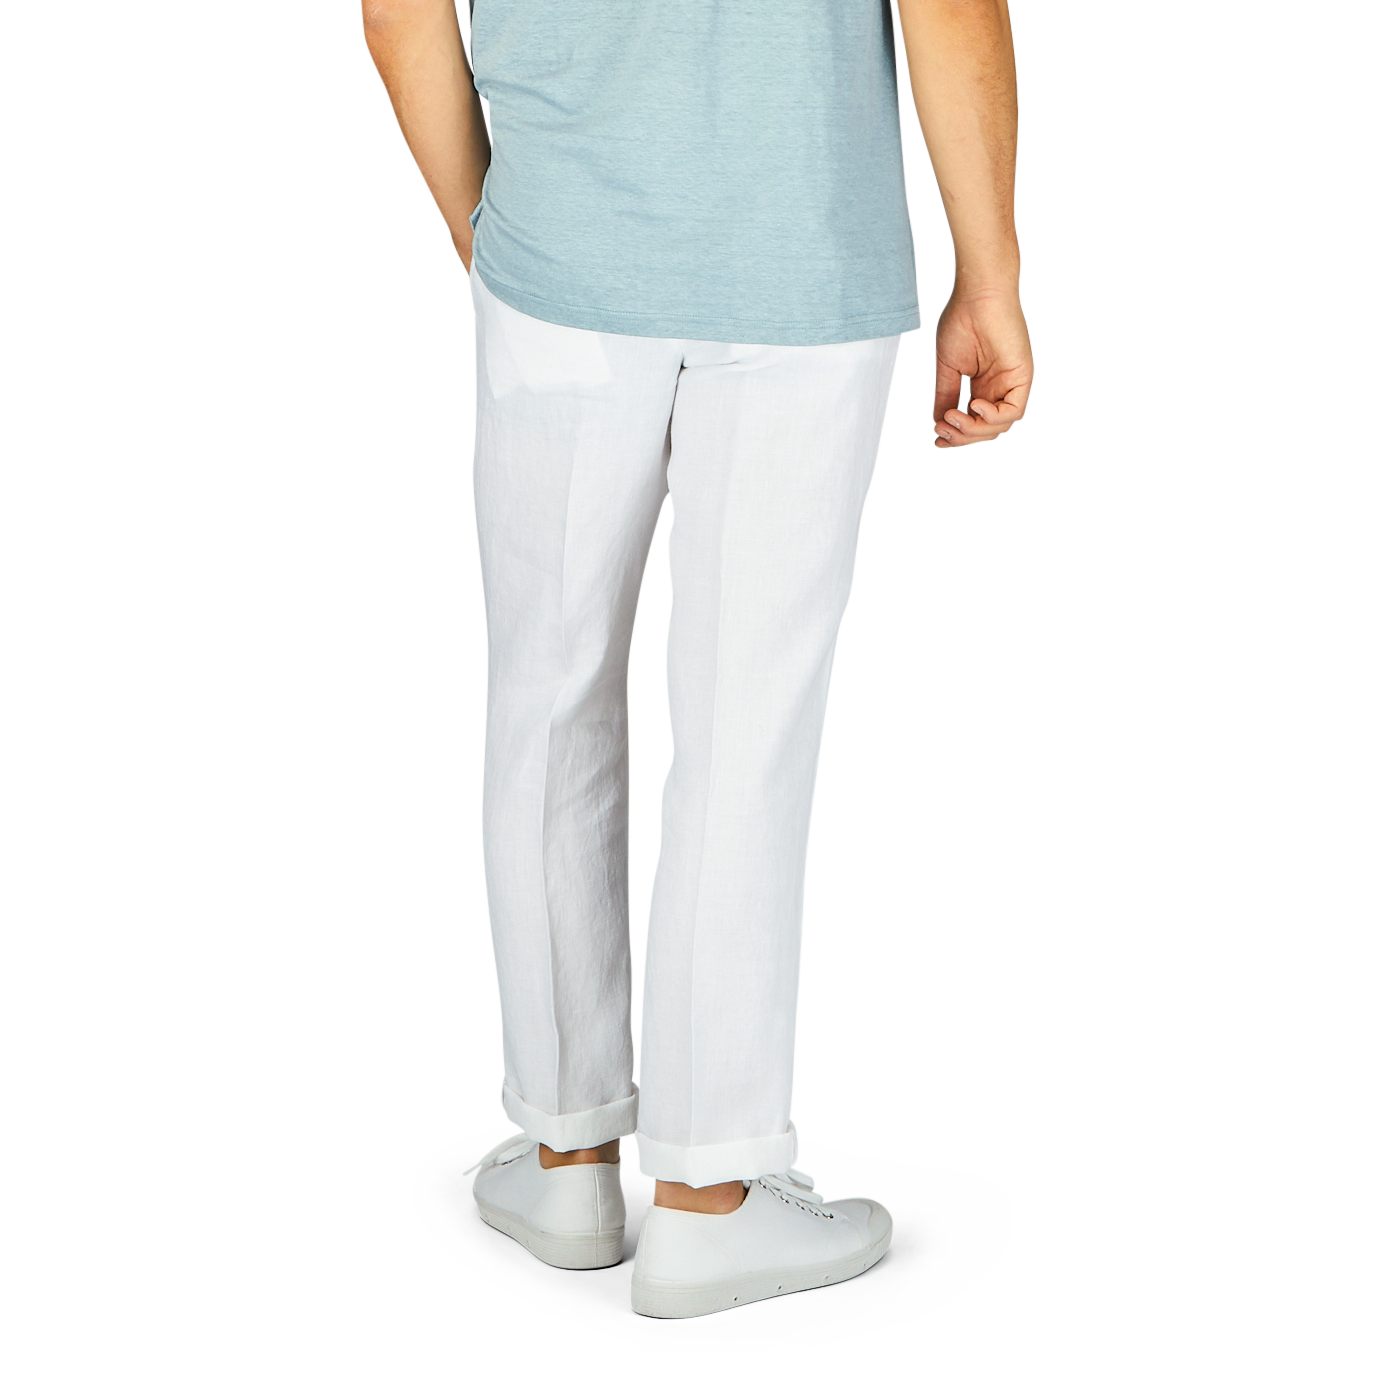 Man standing in a light blue t-shirt and Hiltl White Washed Linen Regular Fit Chinos with white sneakers, partial view showing from waist down.